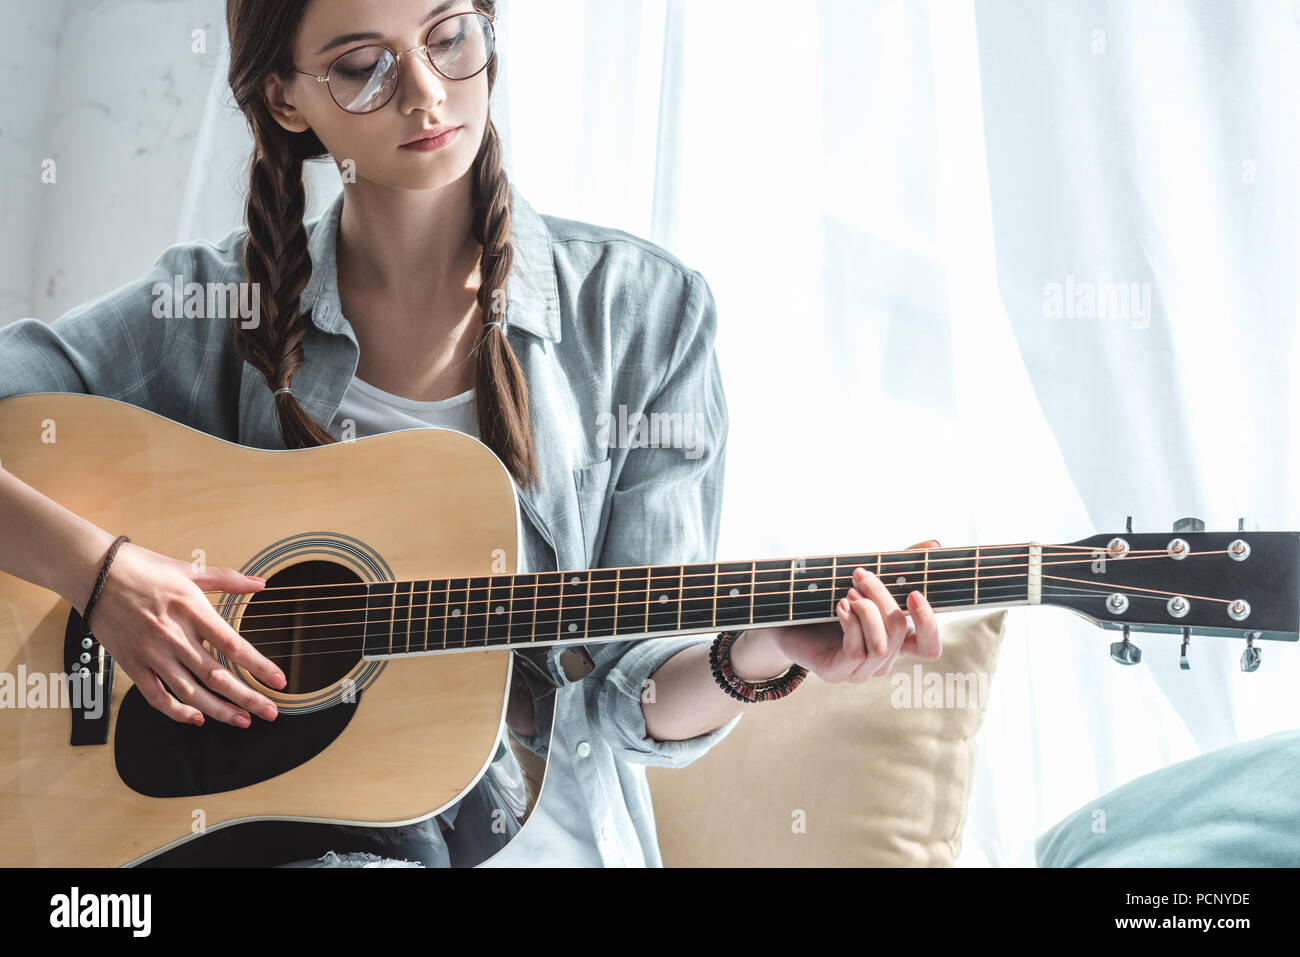 Belle teen girl playing acoustic guitar Banque D'Images